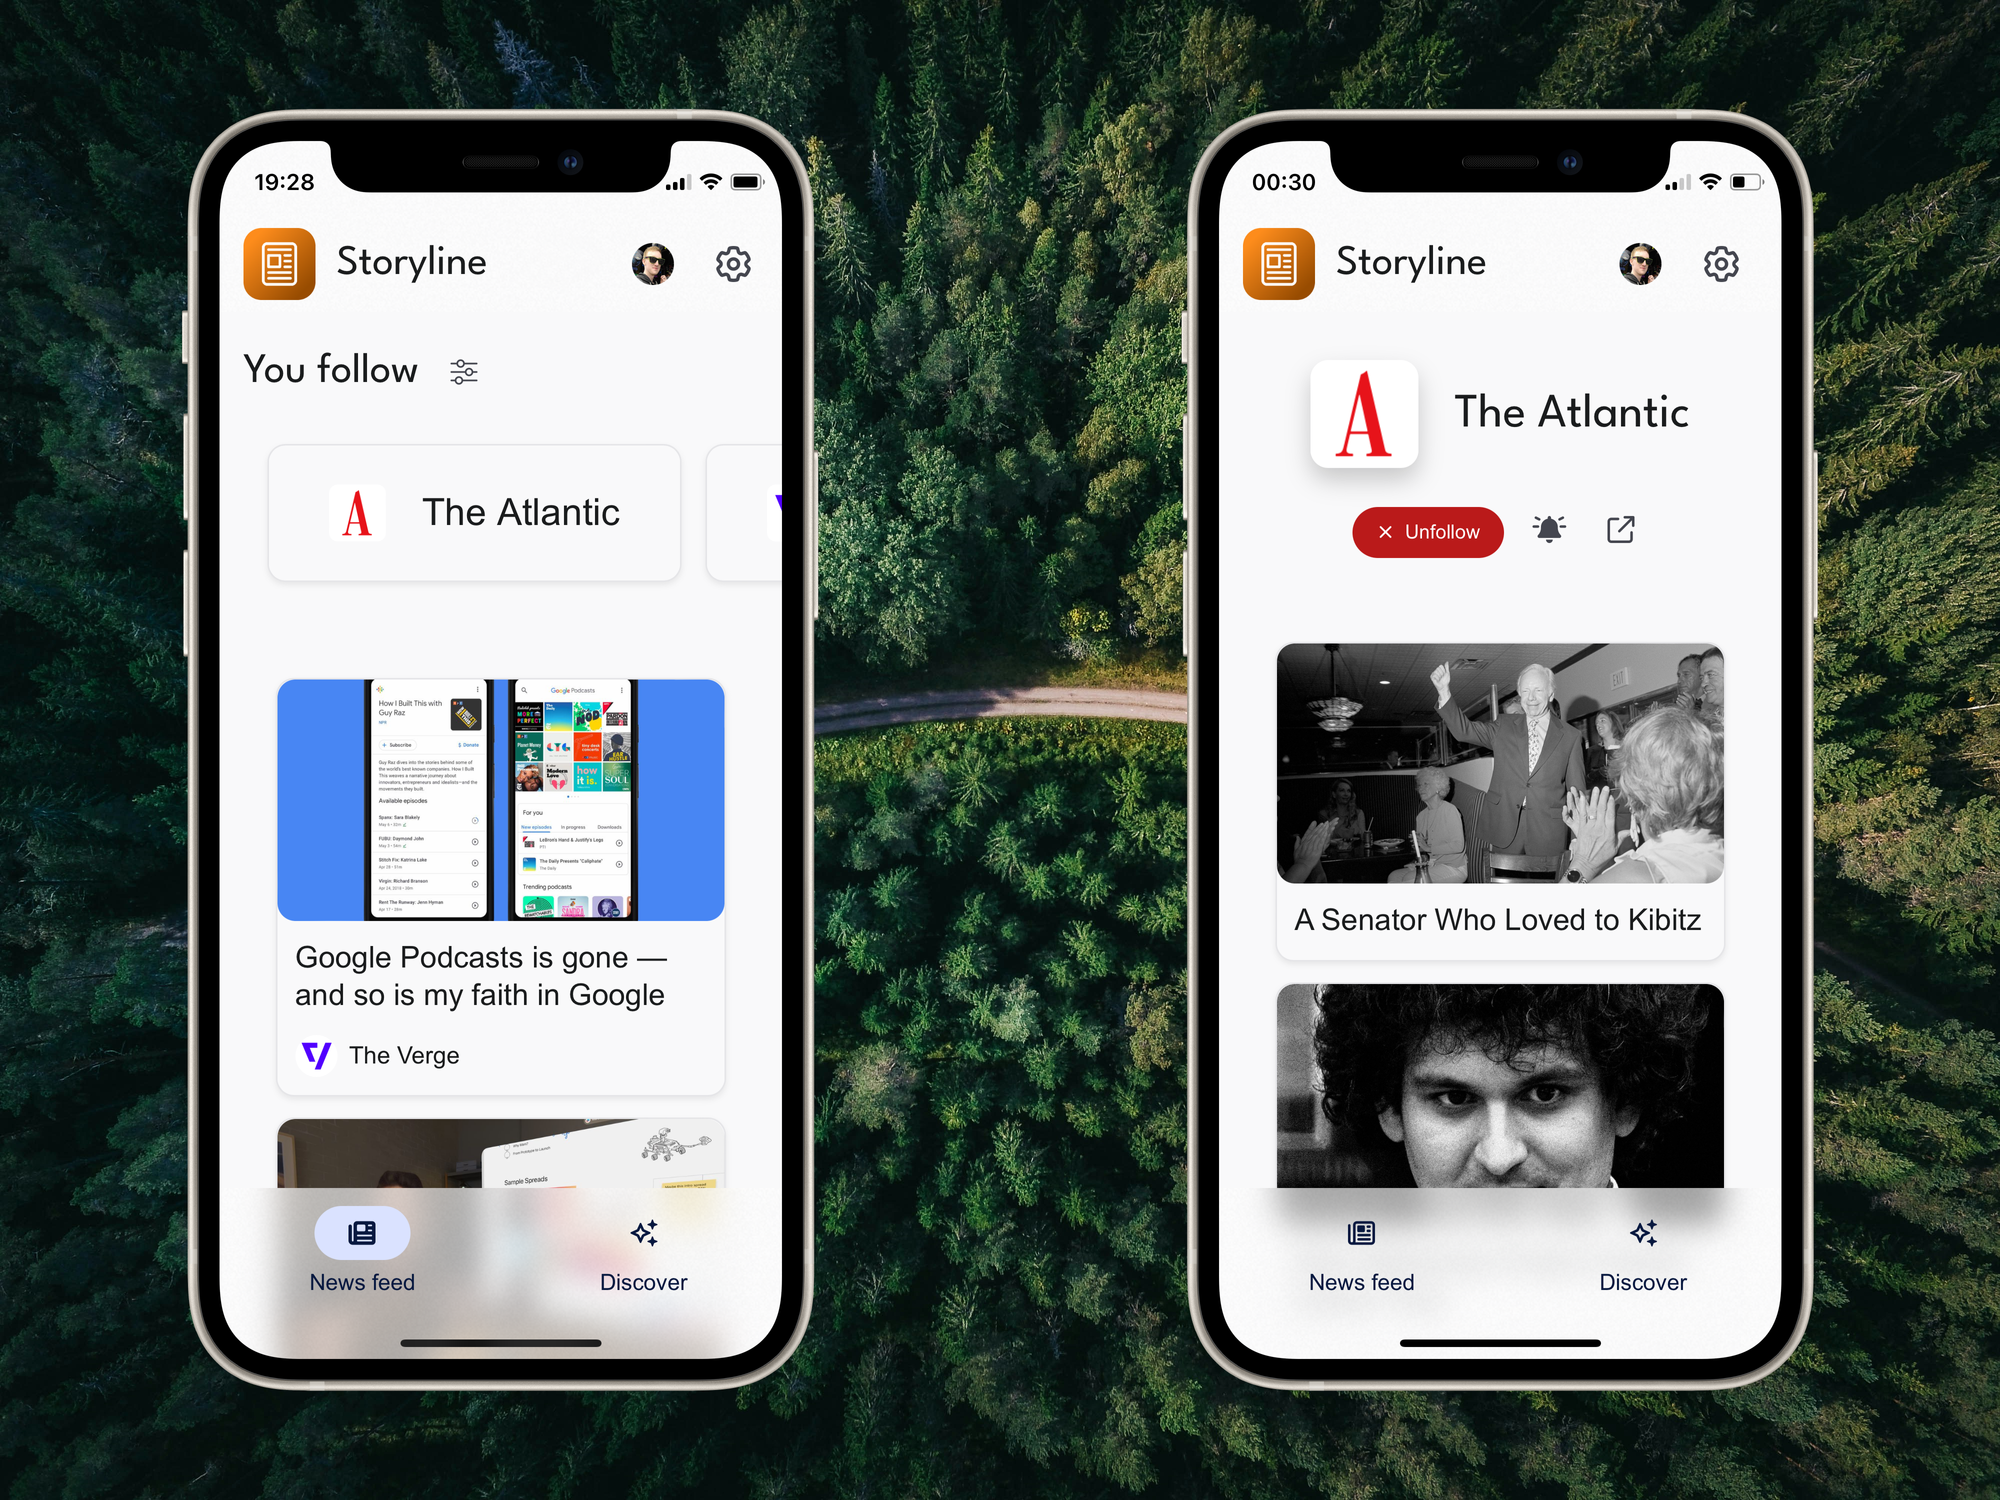 Introducing Storyline, the one place to get all your news